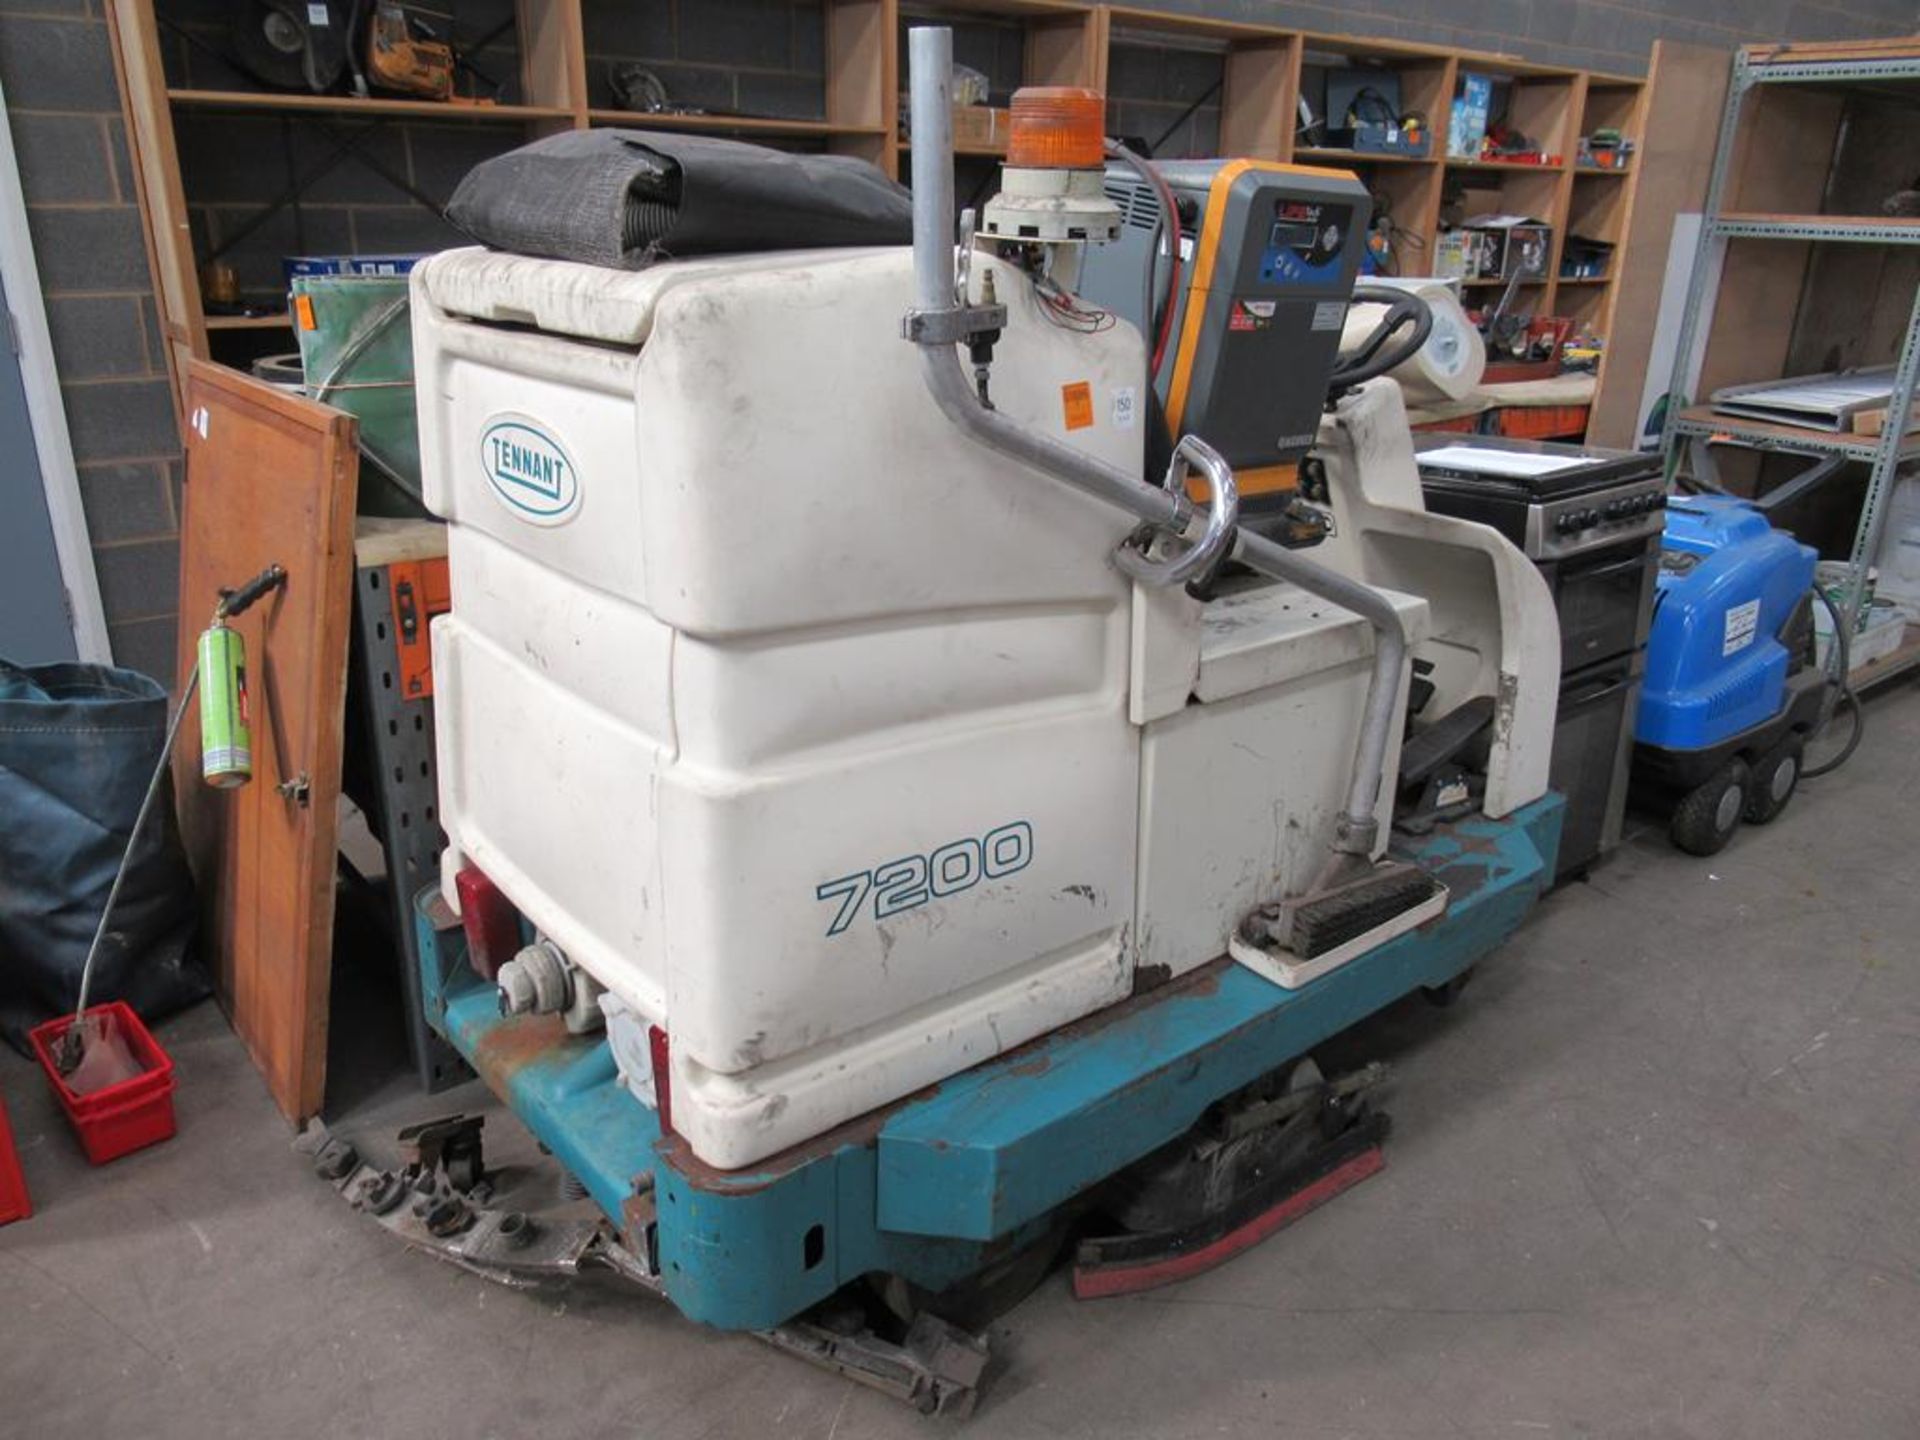 A Tennant 7200 ride on scrubber dryer